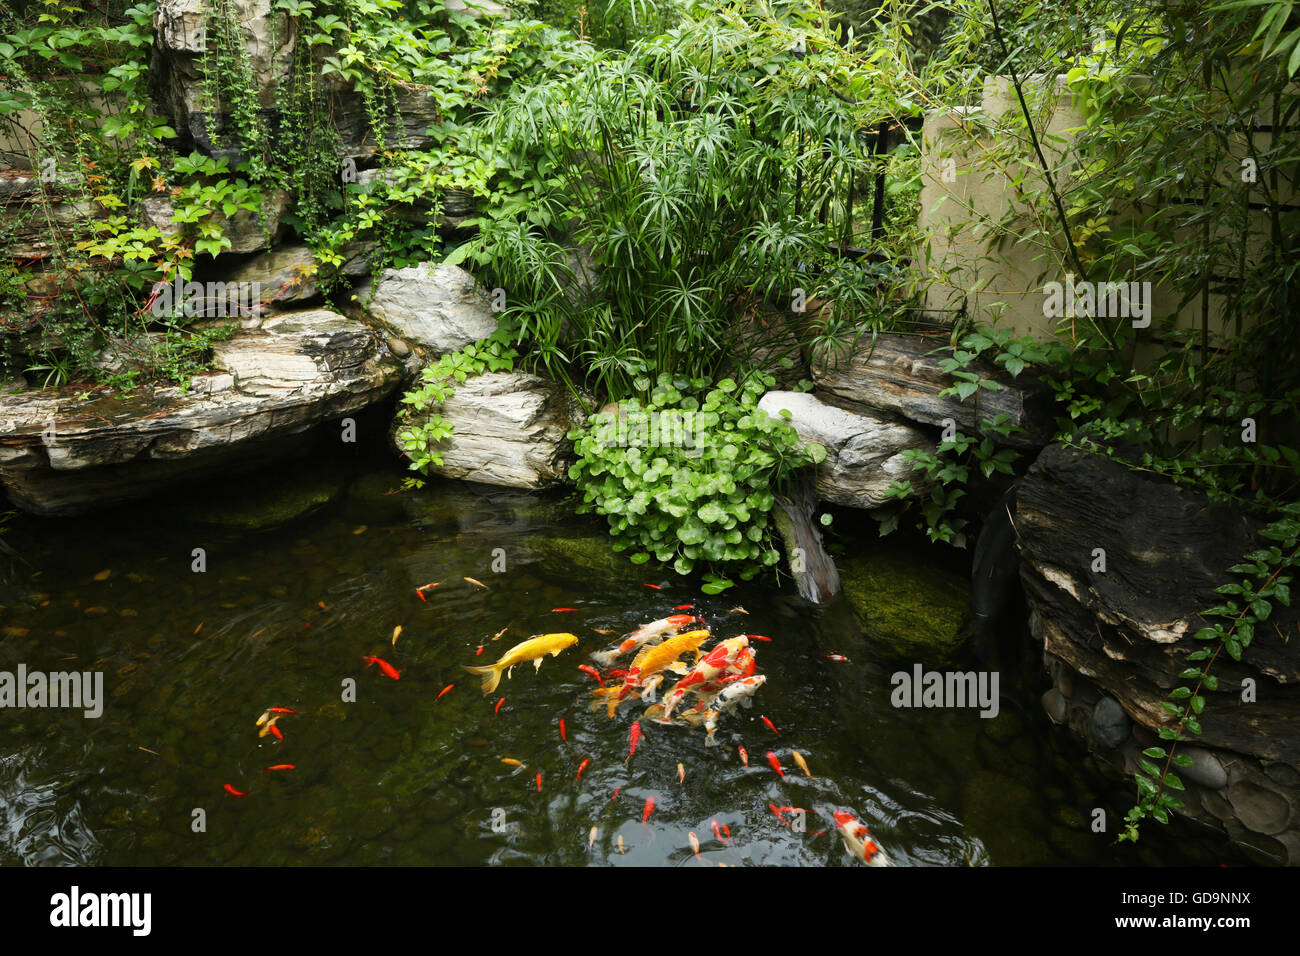 The carp in the pond Stock Photo